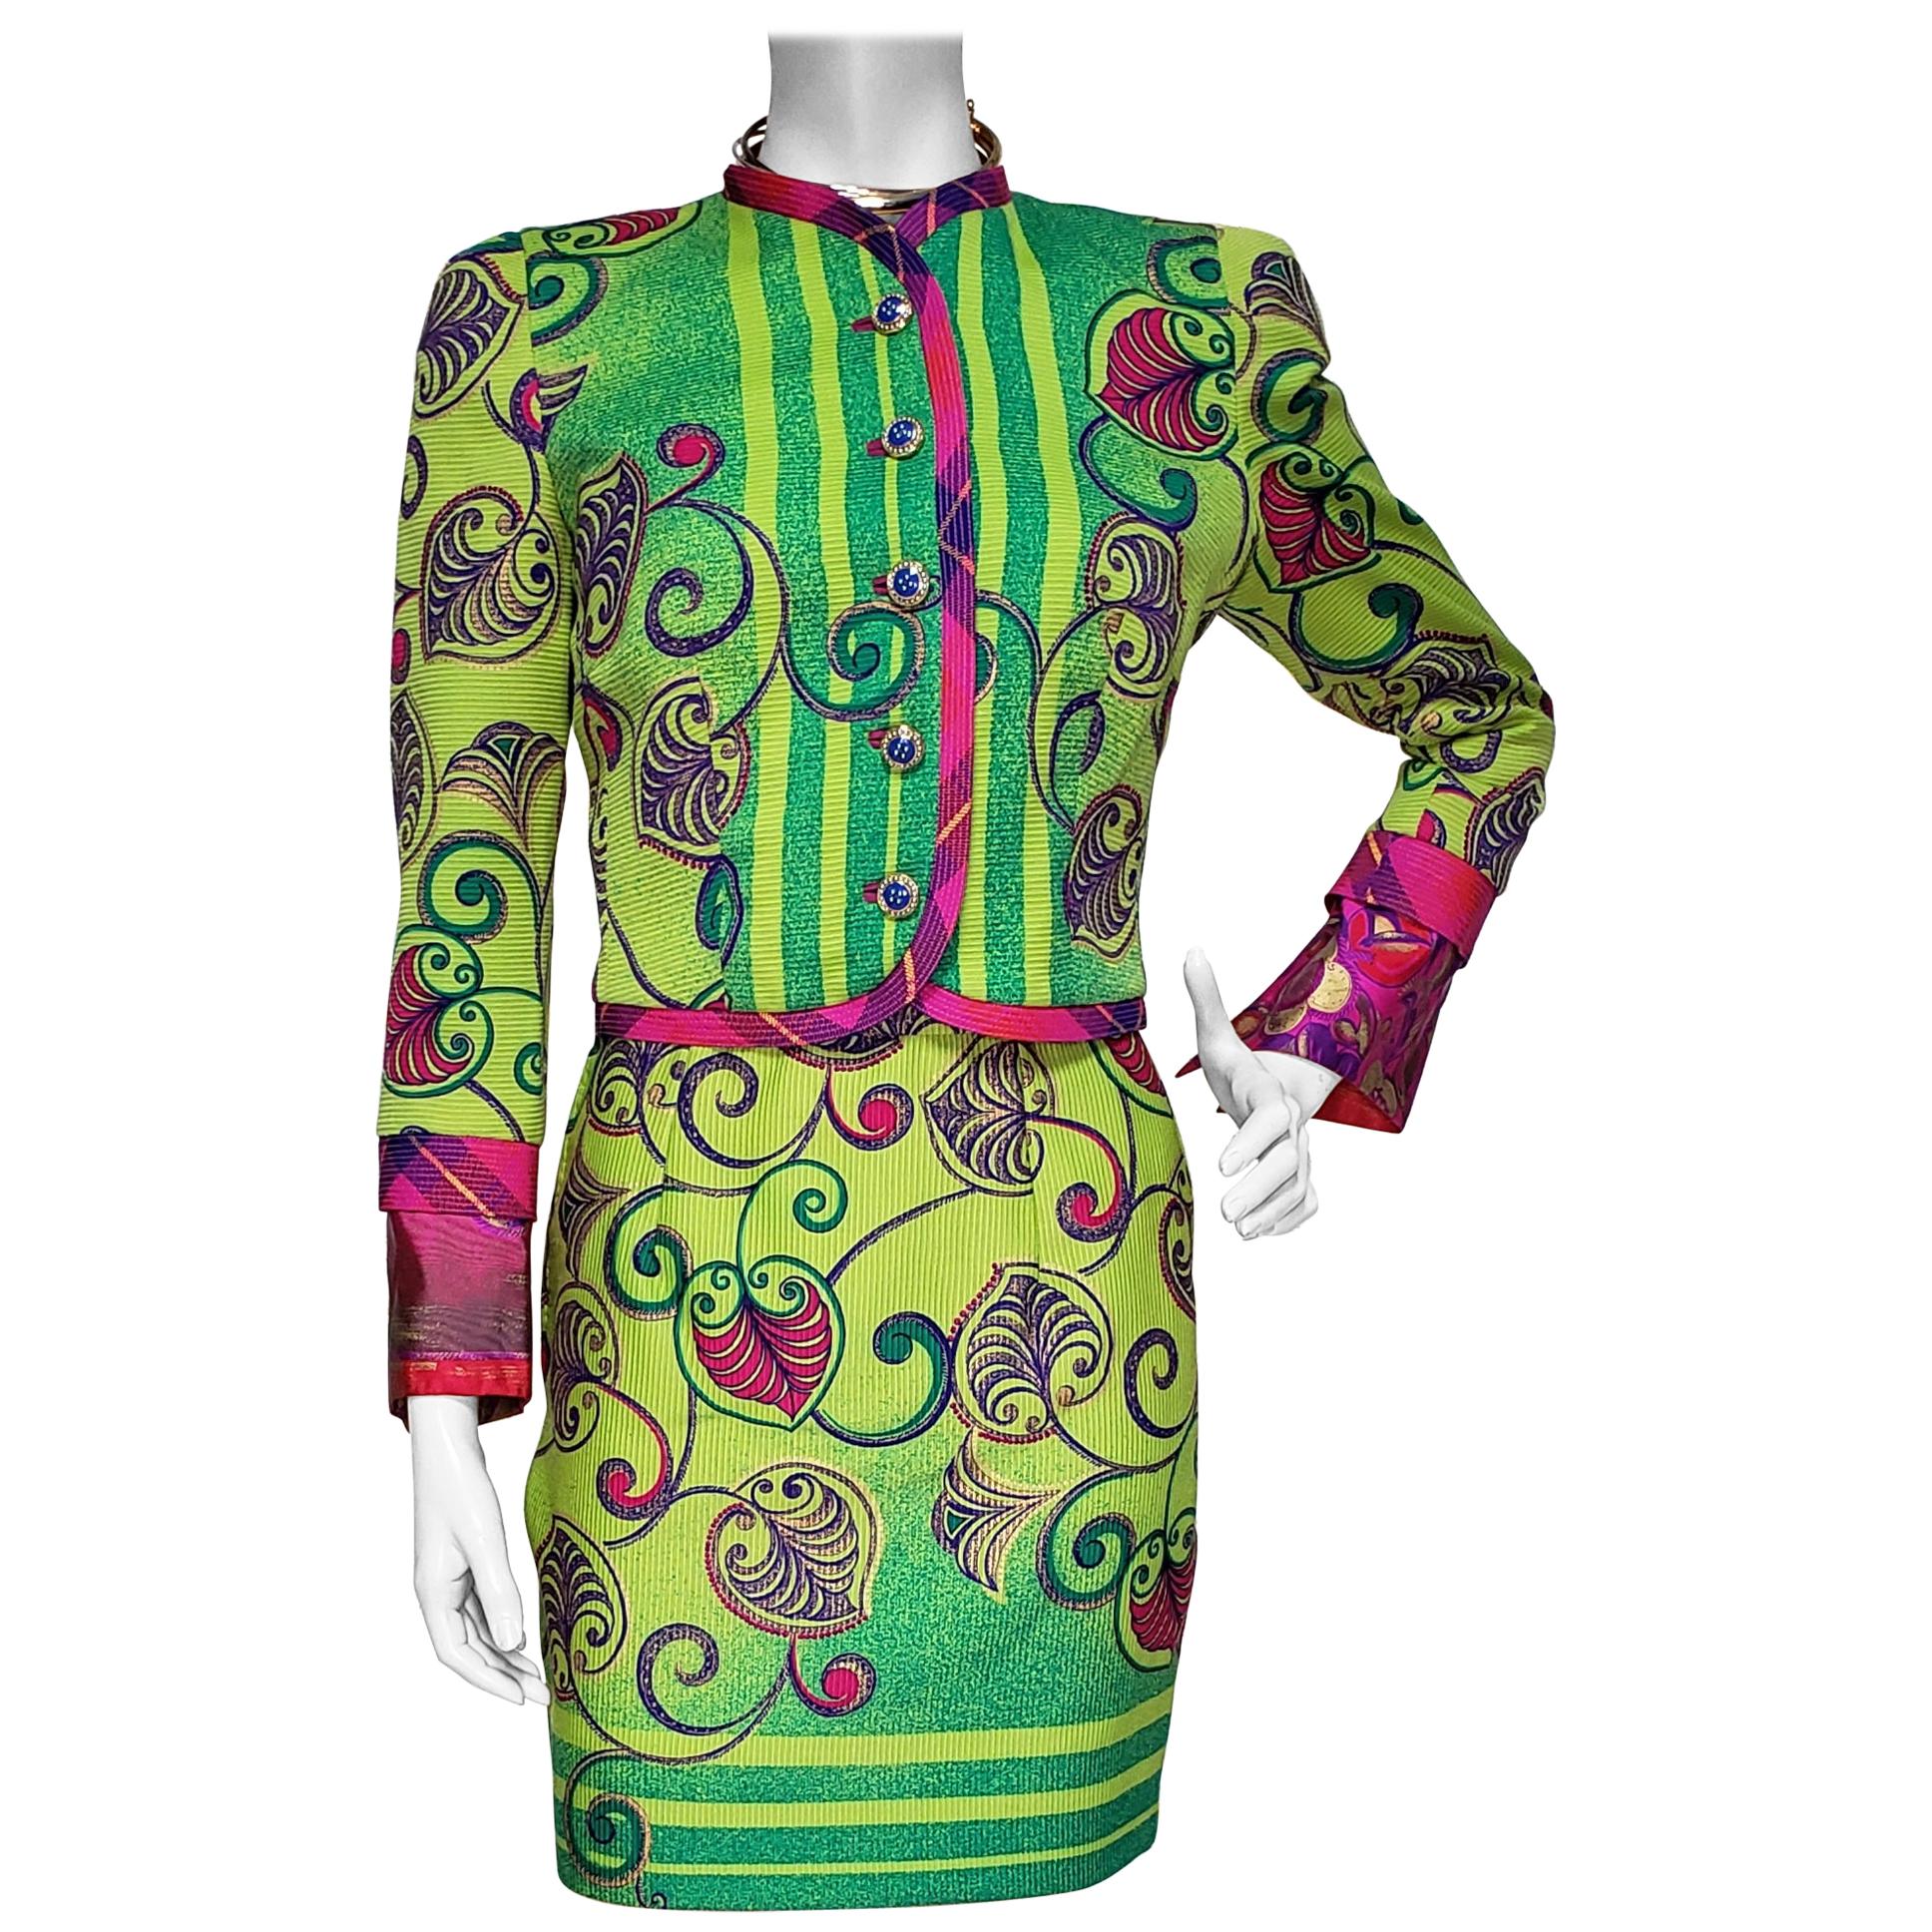 1991 GIANNI VERSACE Atelier Collection Green Vintage Jacket and Skirt Suit